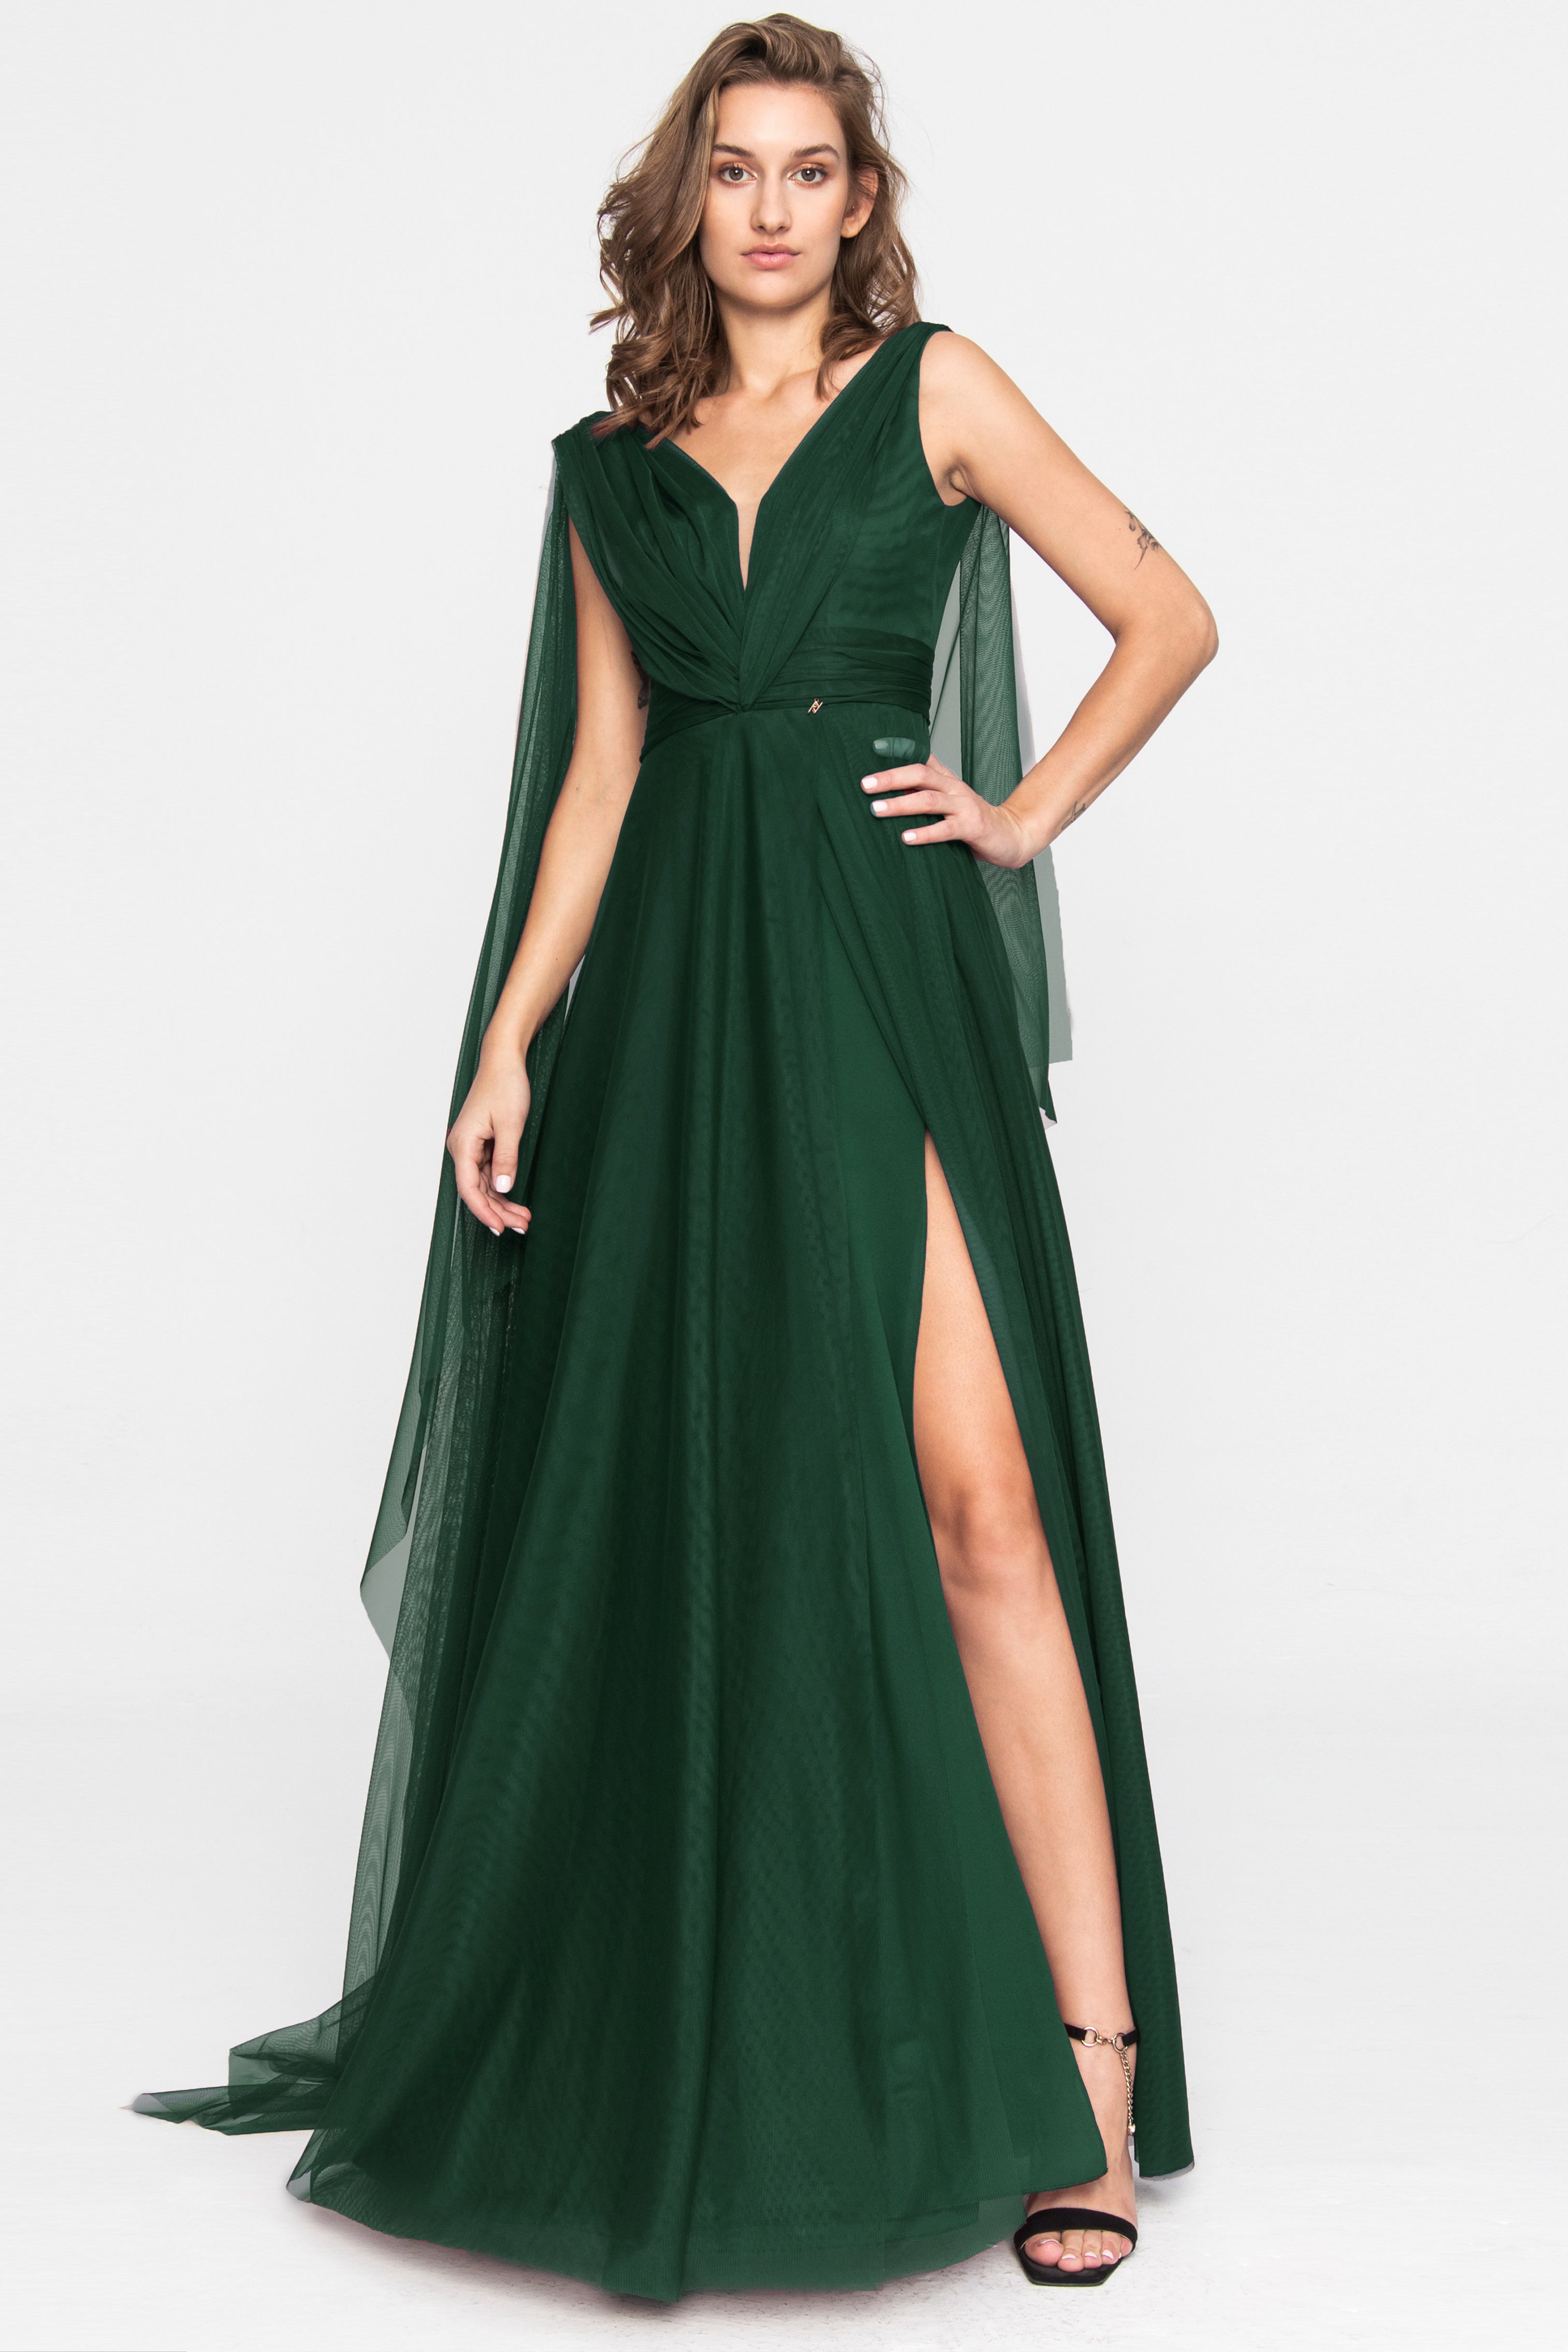 Tulle Terracotta Evening Gown Emerald green